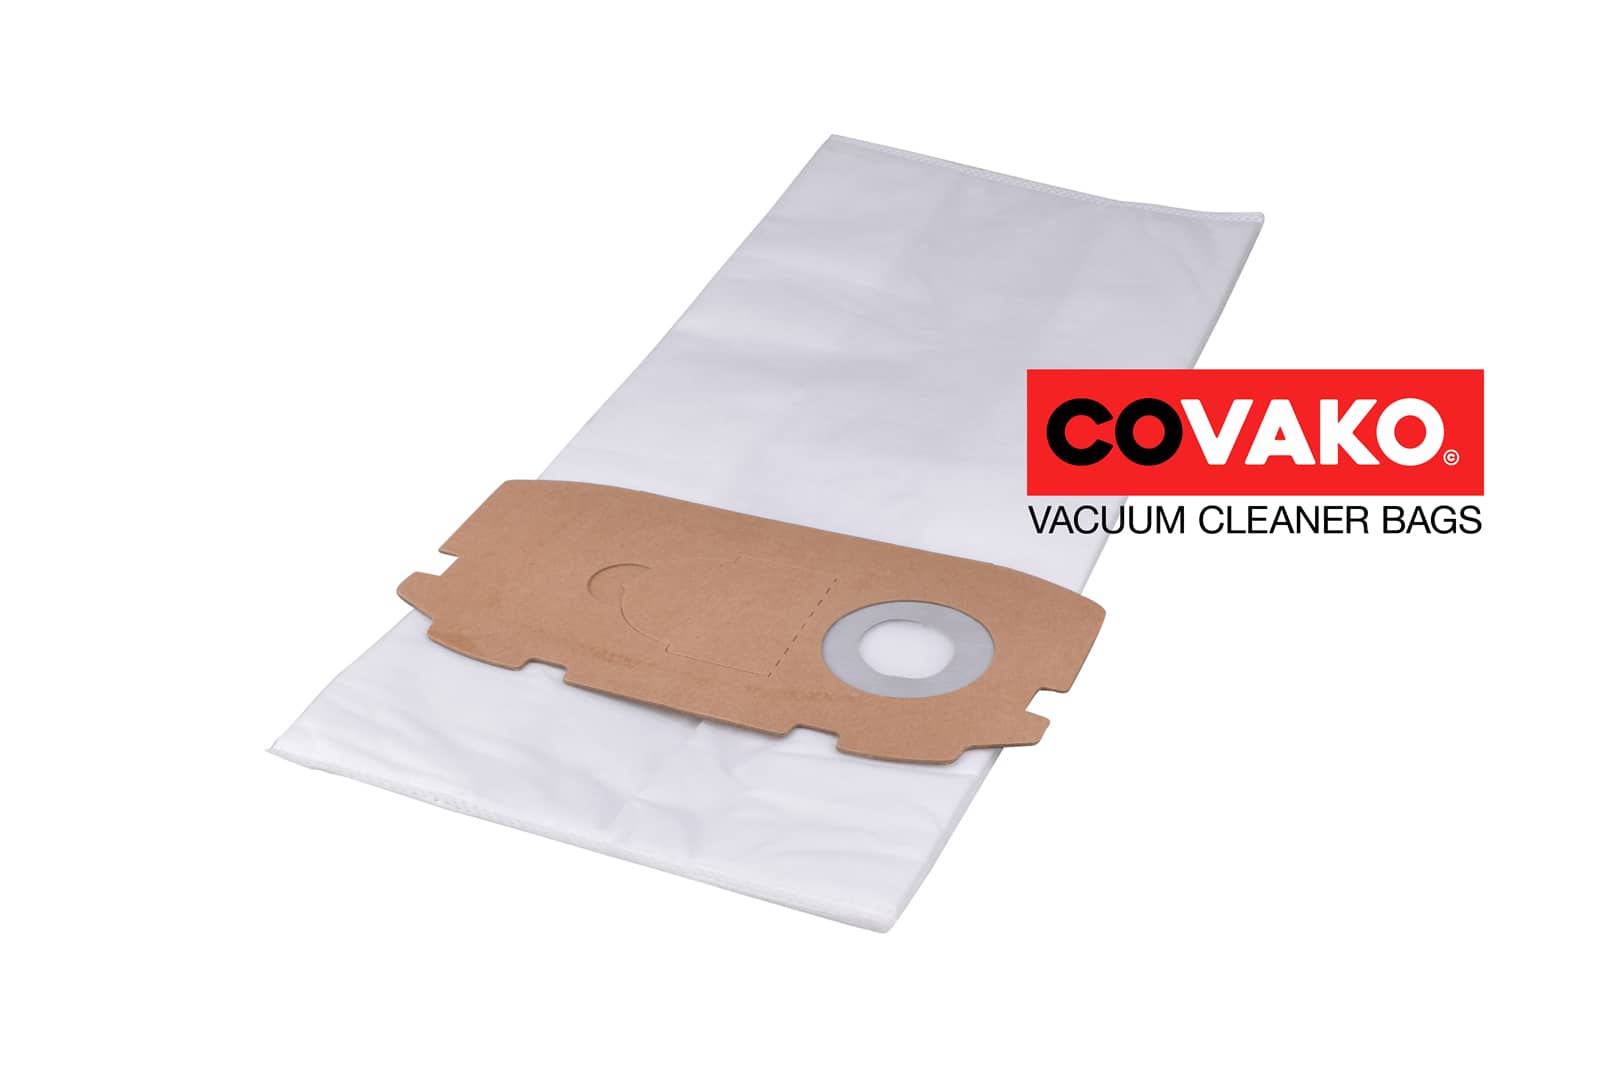 Protool CTL Midi / Synthesis - Protool vacuum cleaner bags